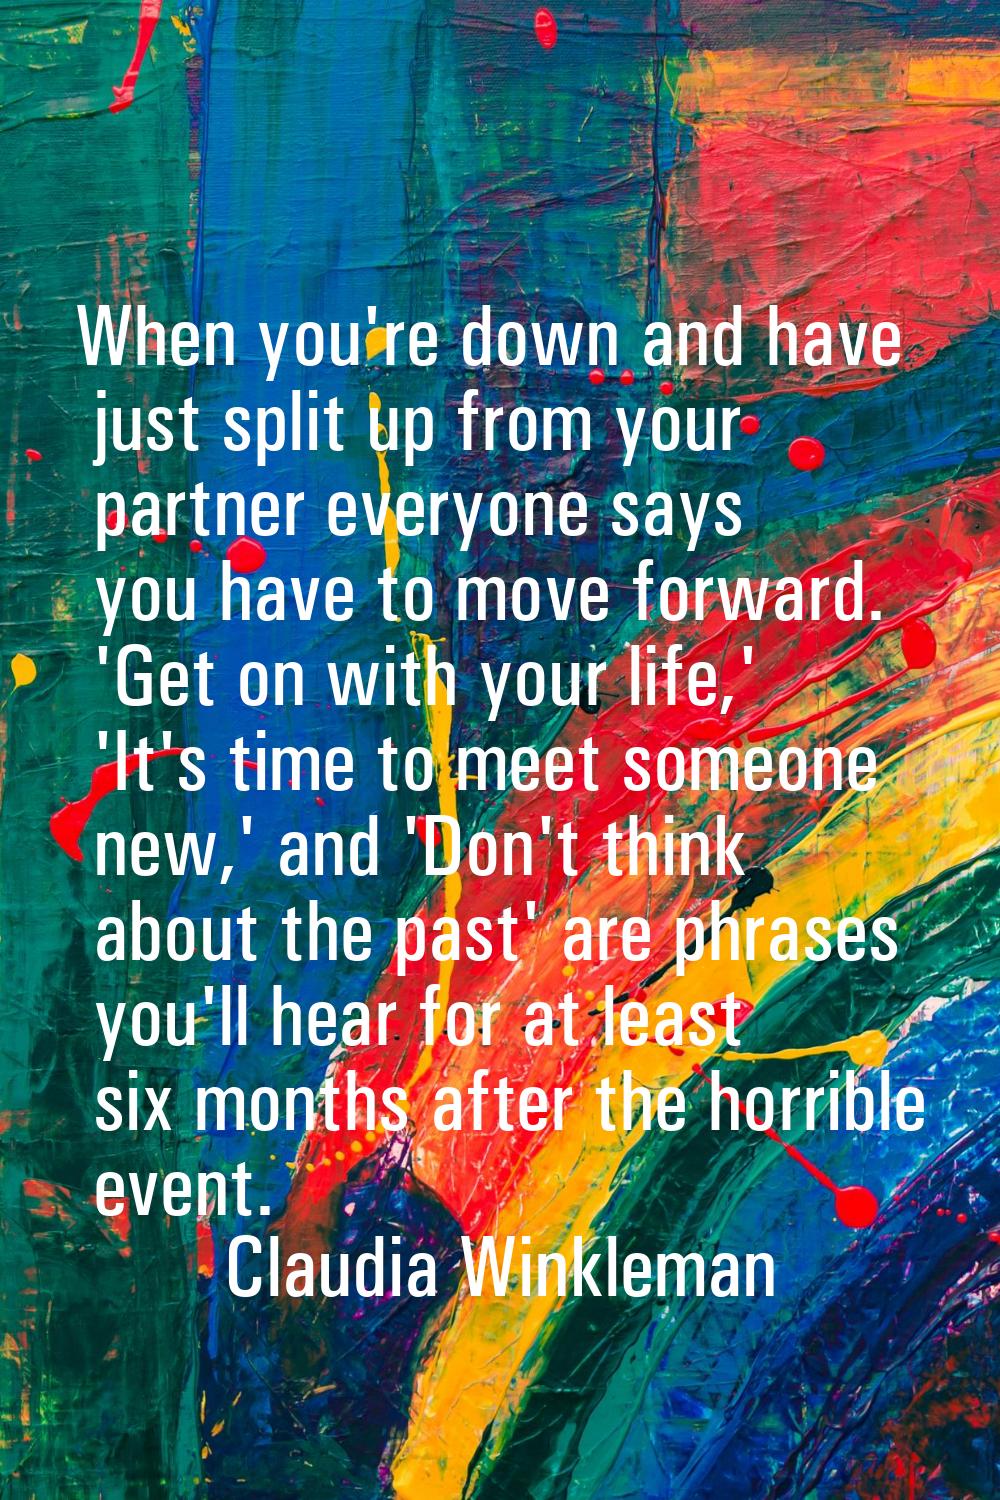 When you're down and have just split up from your partner everyone says you have to move forward. '